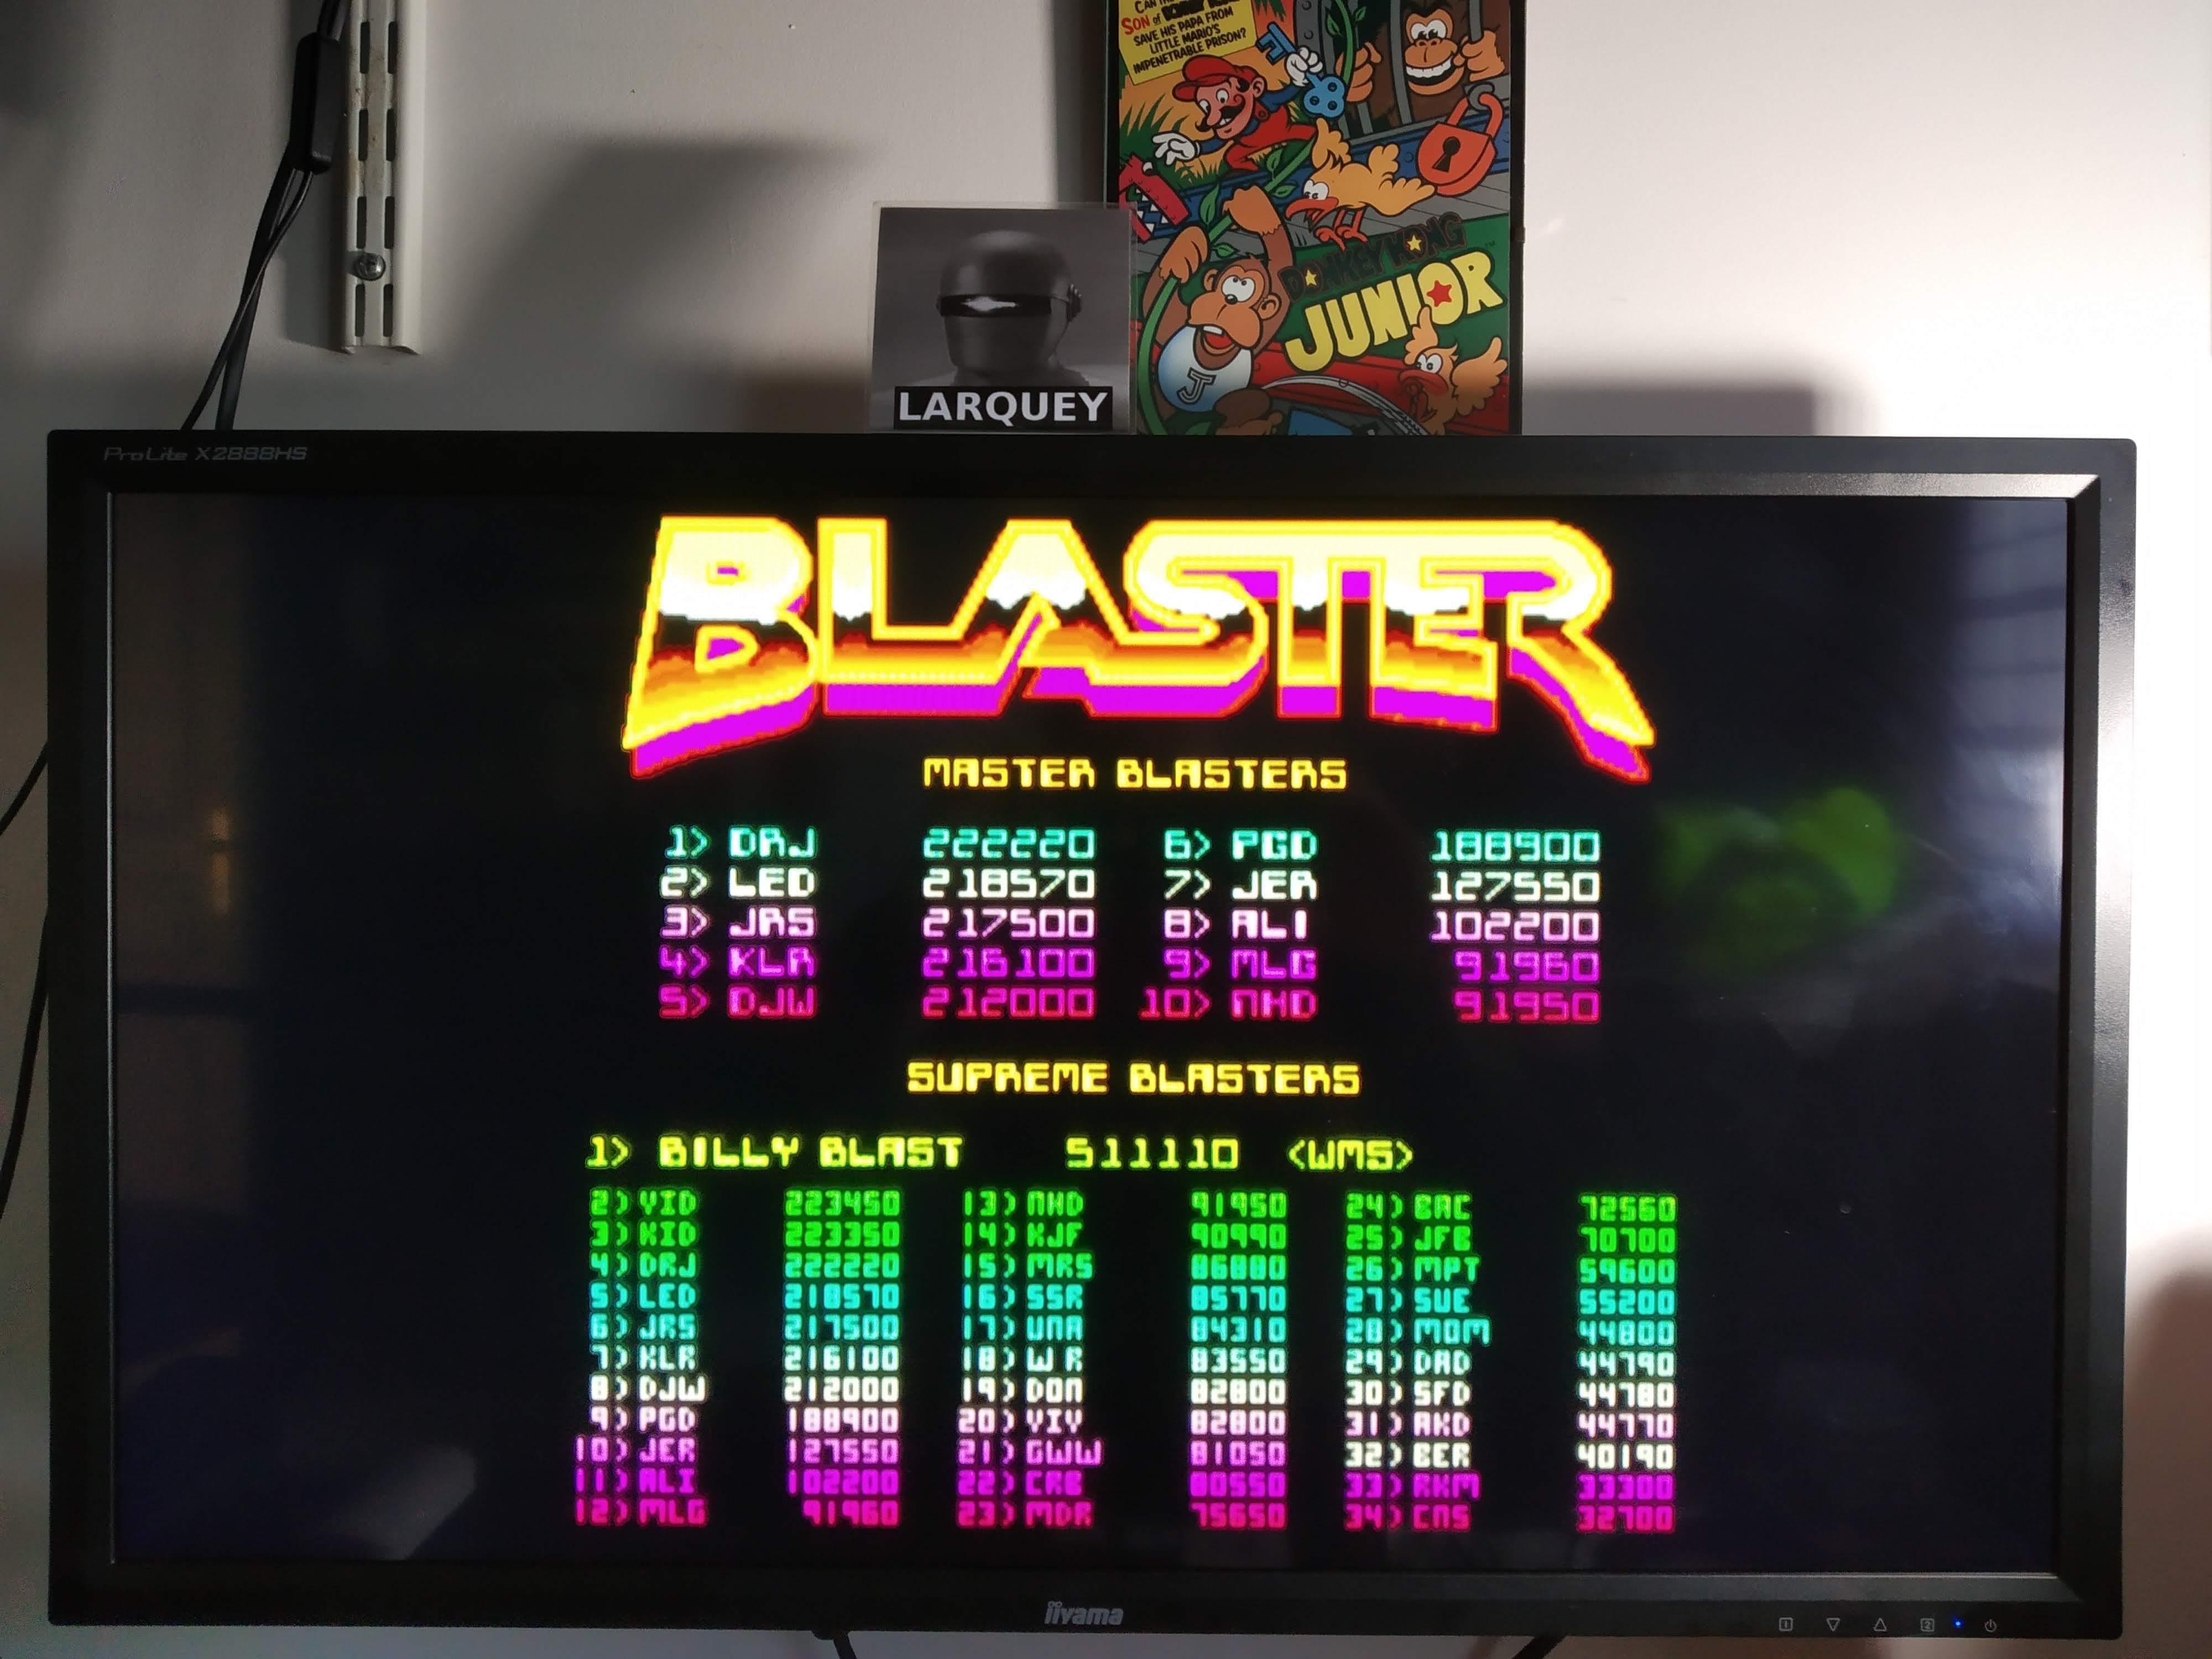 Larquey: Midway Arcade Treasures: Blaster (Playstation 2 Emulated) 40,190 points on 2020-08-02 08:55:35